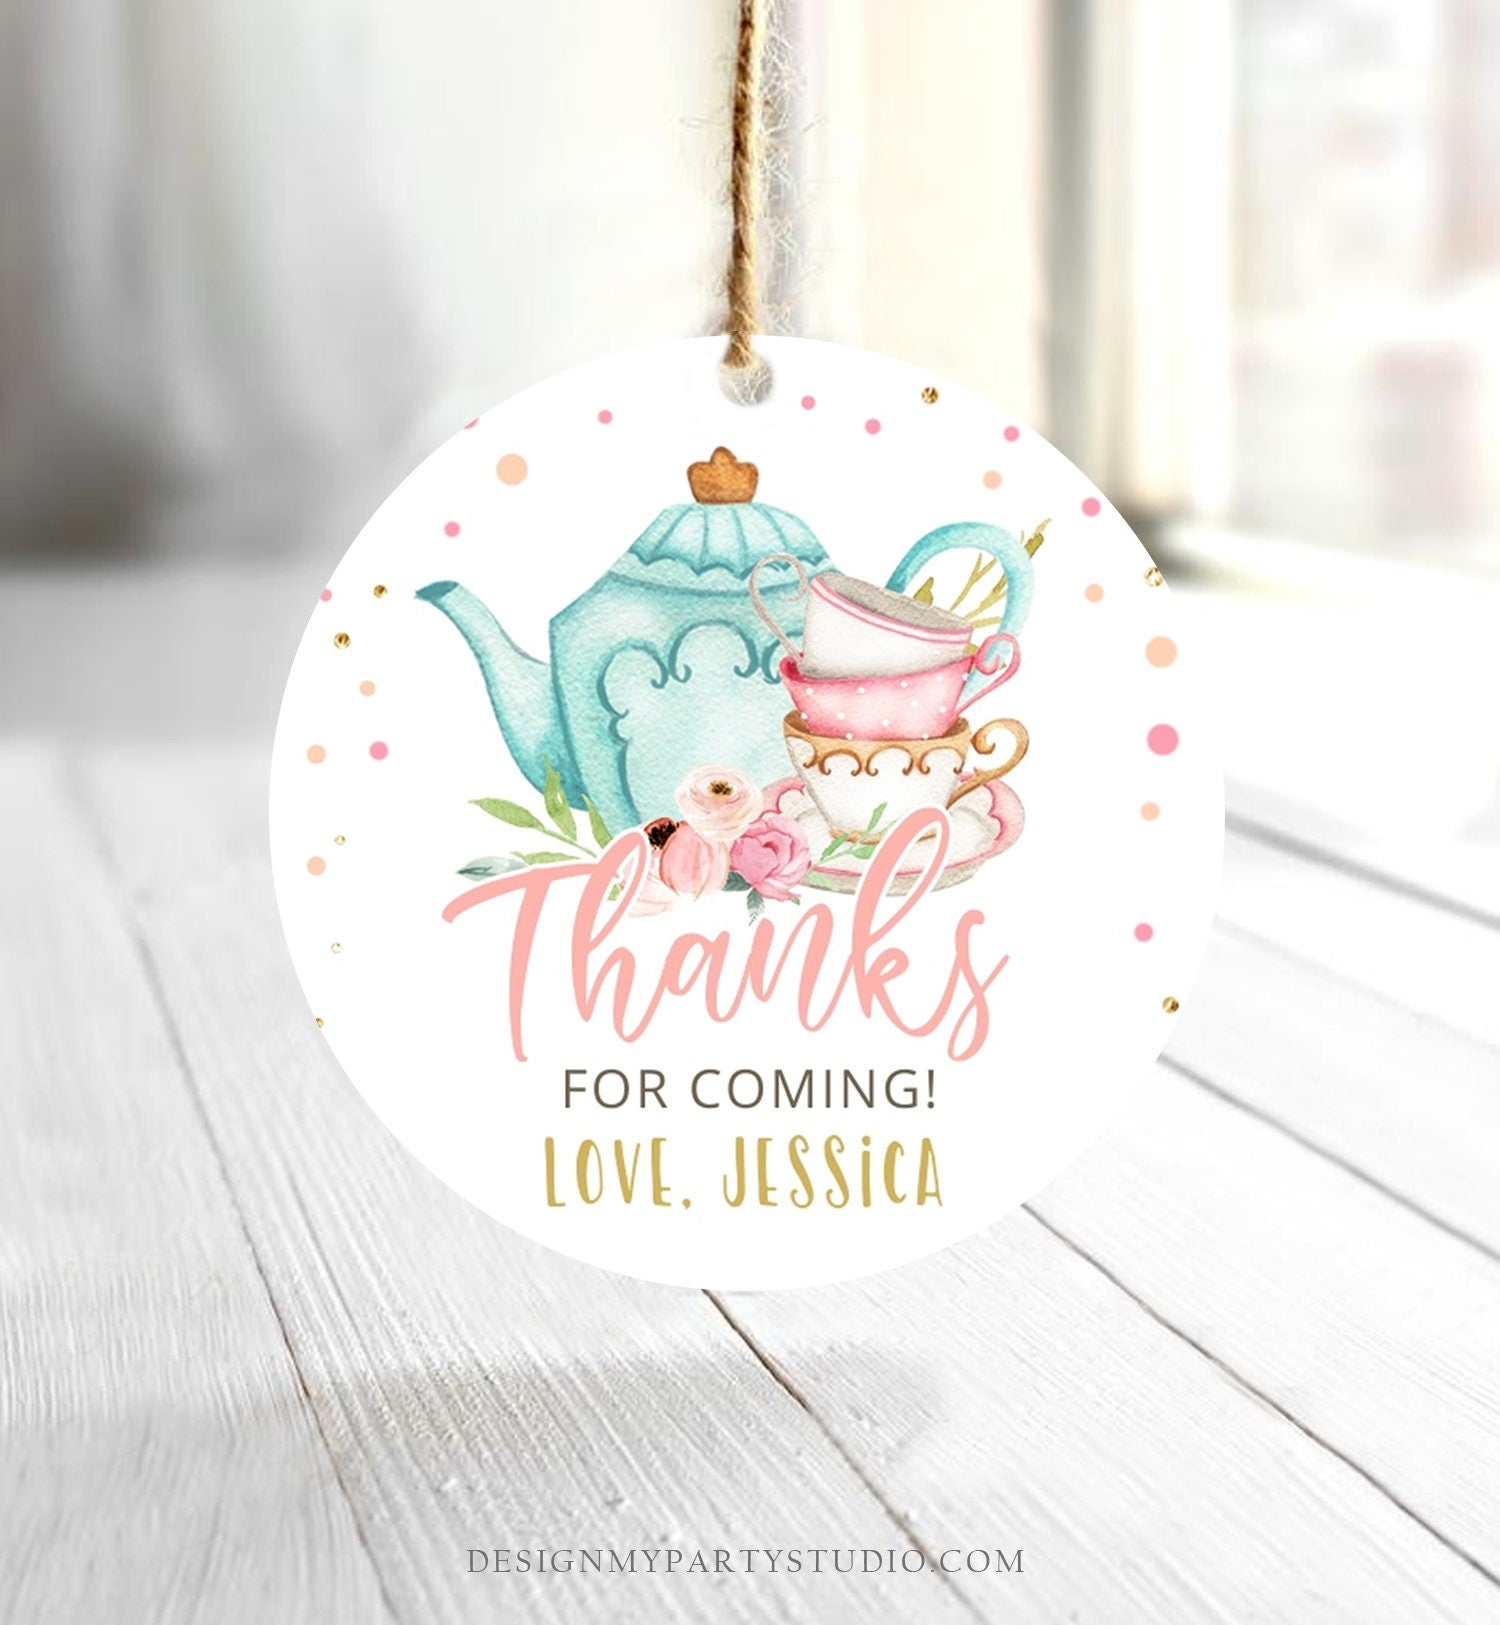 Editable Tea Party Favor Tag Sticker Baby Shower Baby is Brewing Floral Pink Gold Whimsical Girl Square Round Template Corjl Printable 0349